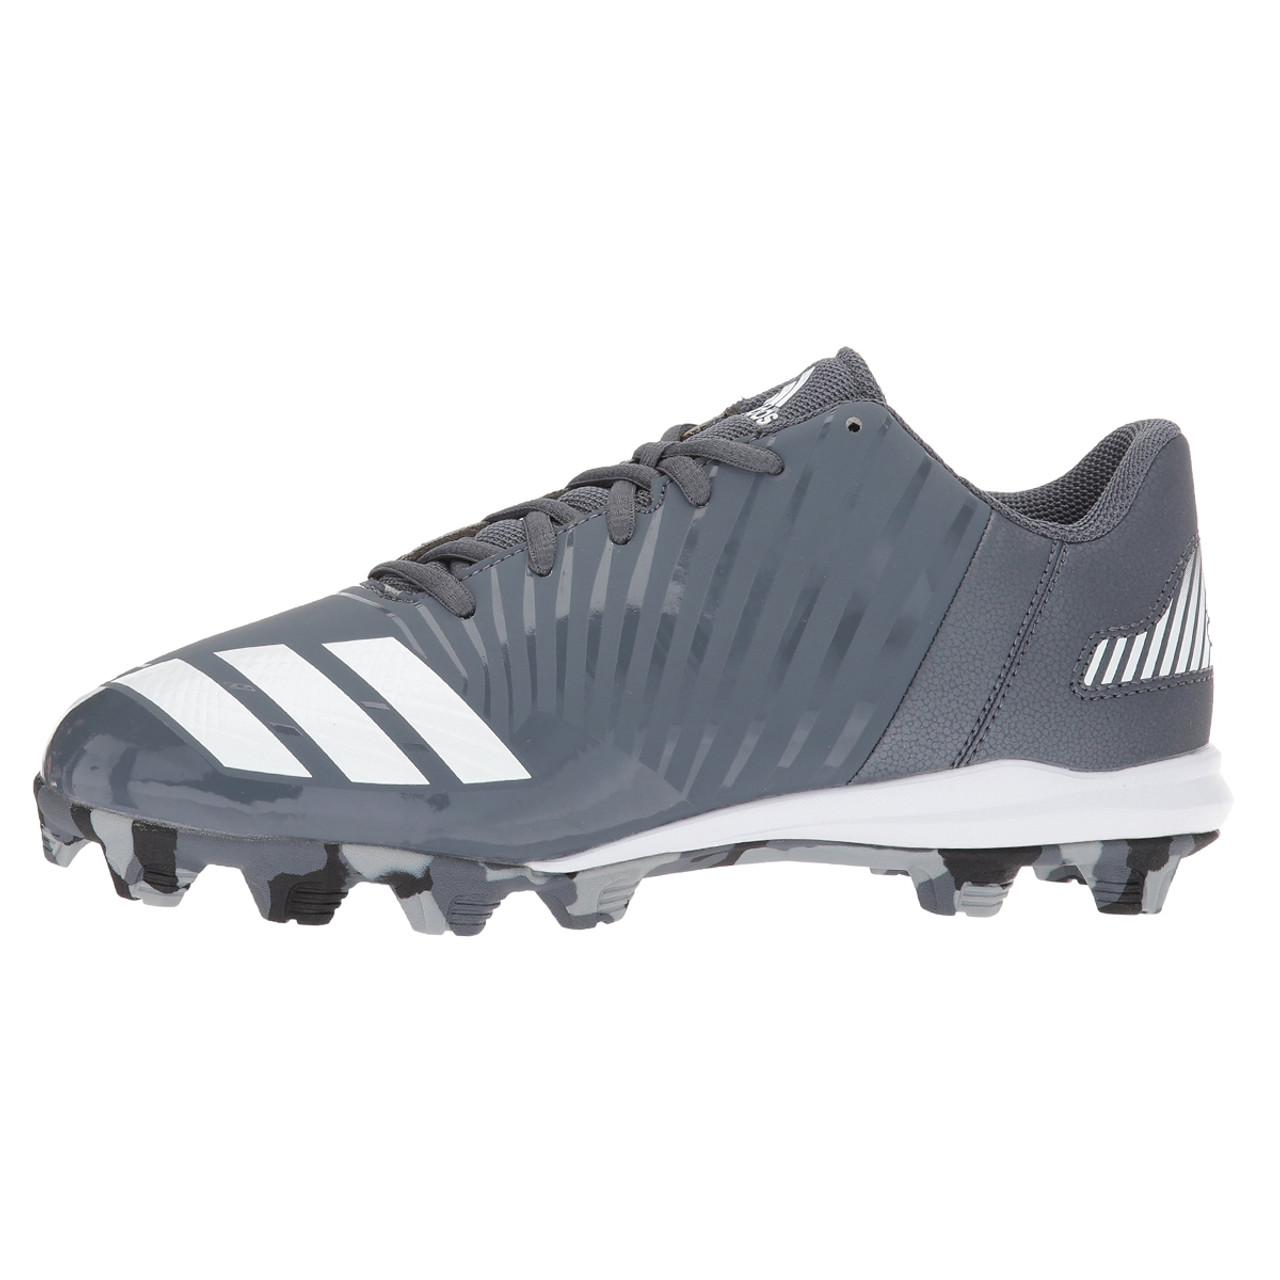 adidas youth cleats